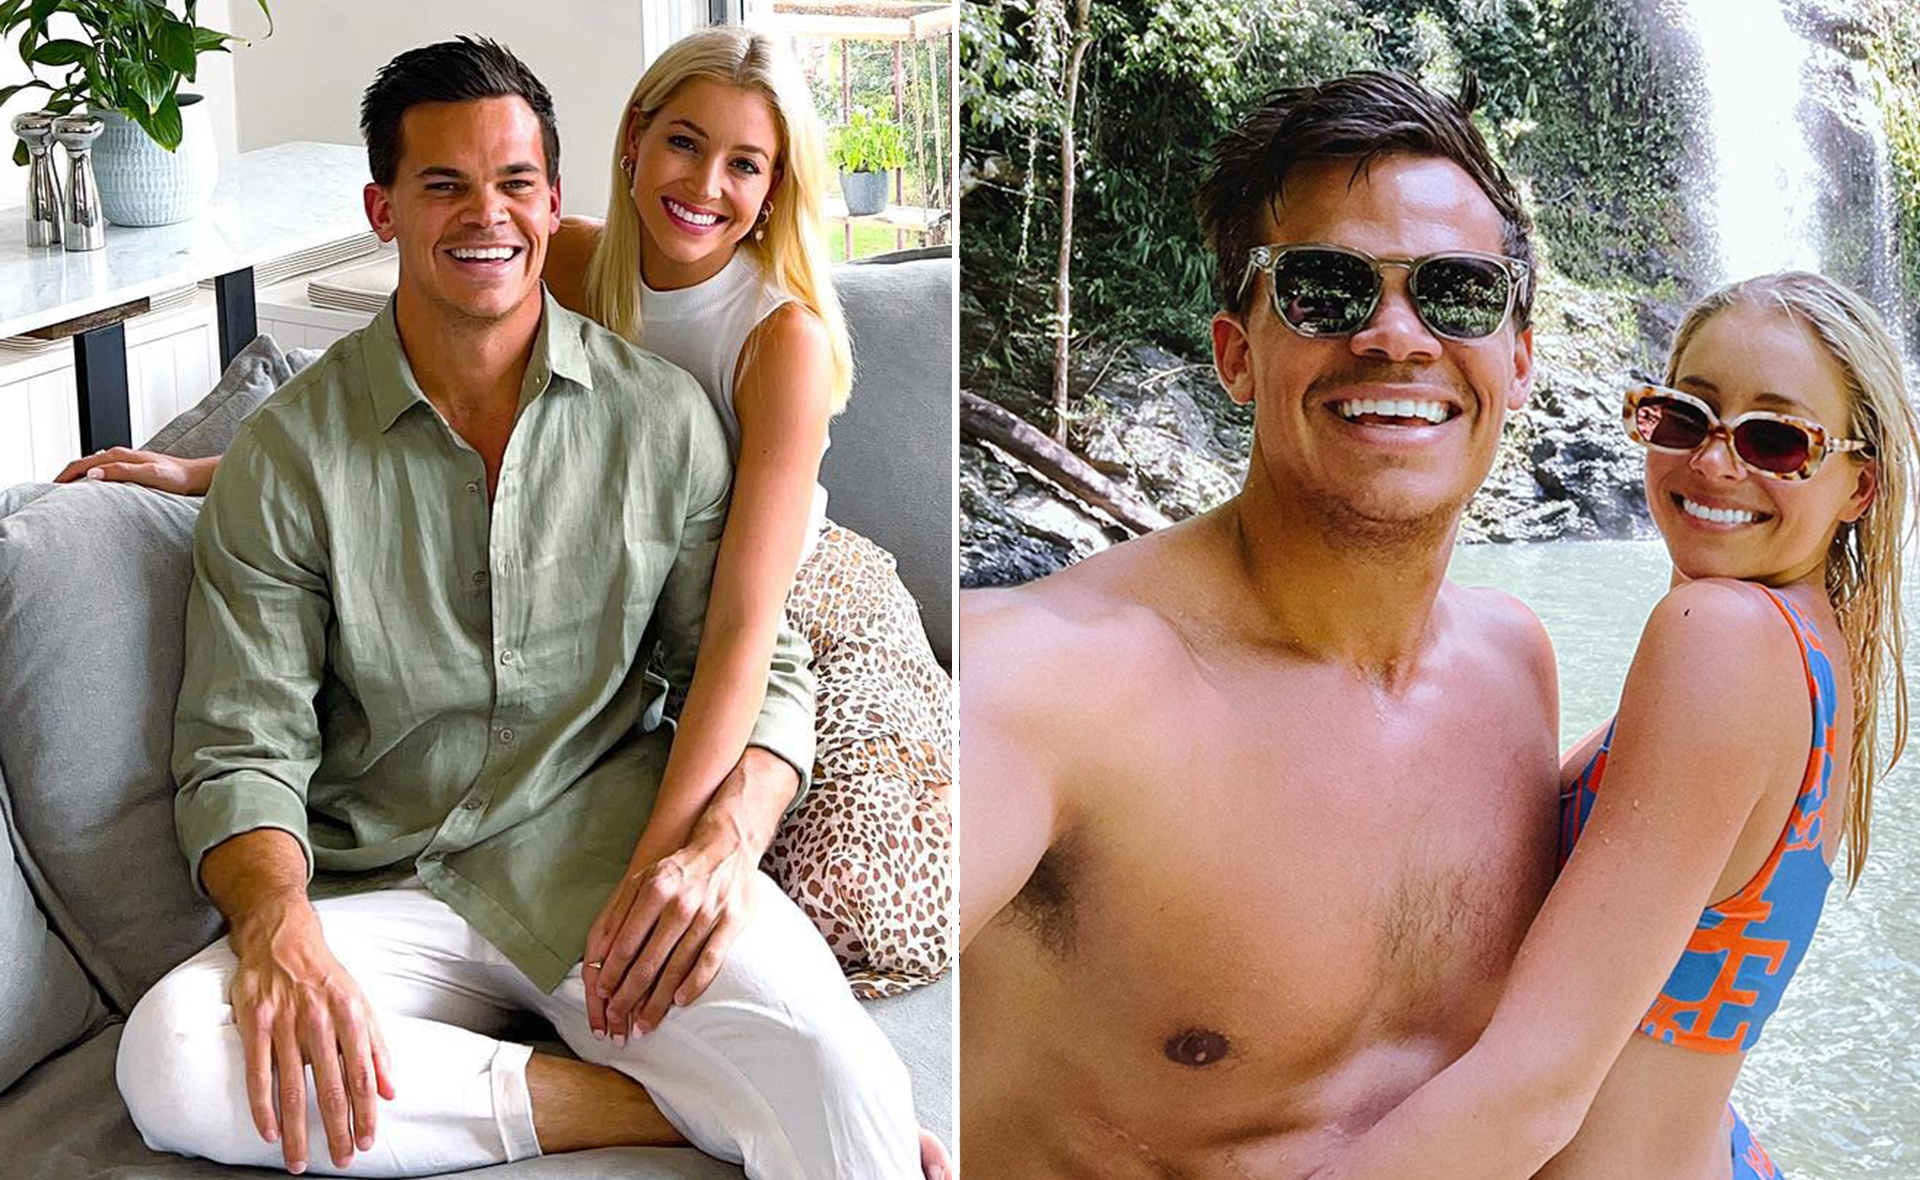 Holly Kingston and Jimmy Nicholson vow to be a lasting Bachelor success story: “We have been really true the whole time”